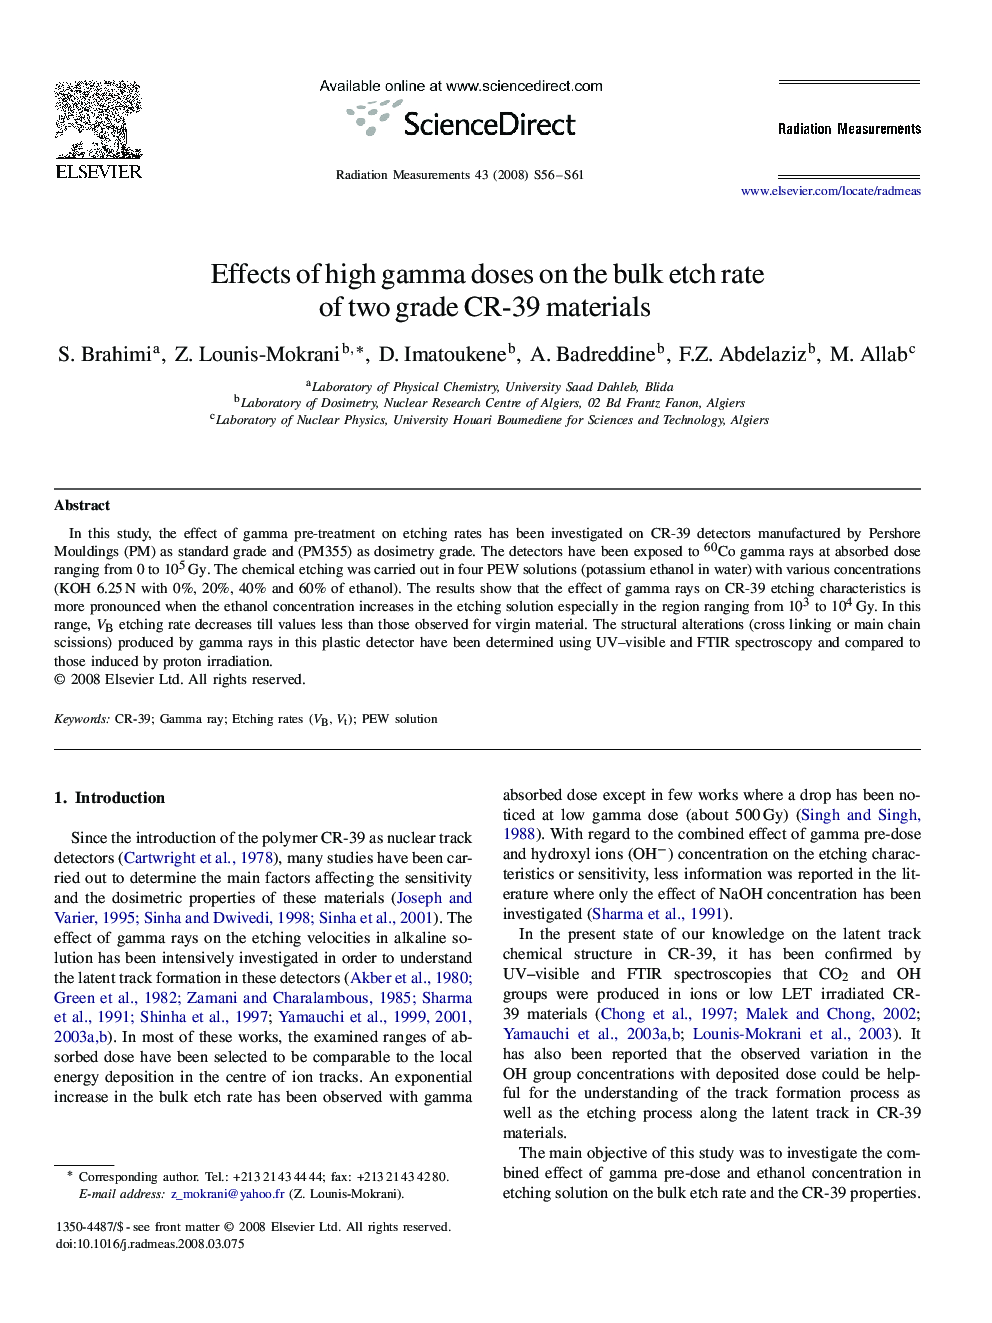 Effects of high gamma doses on the bulk etch rate of two grade CR-39 materials